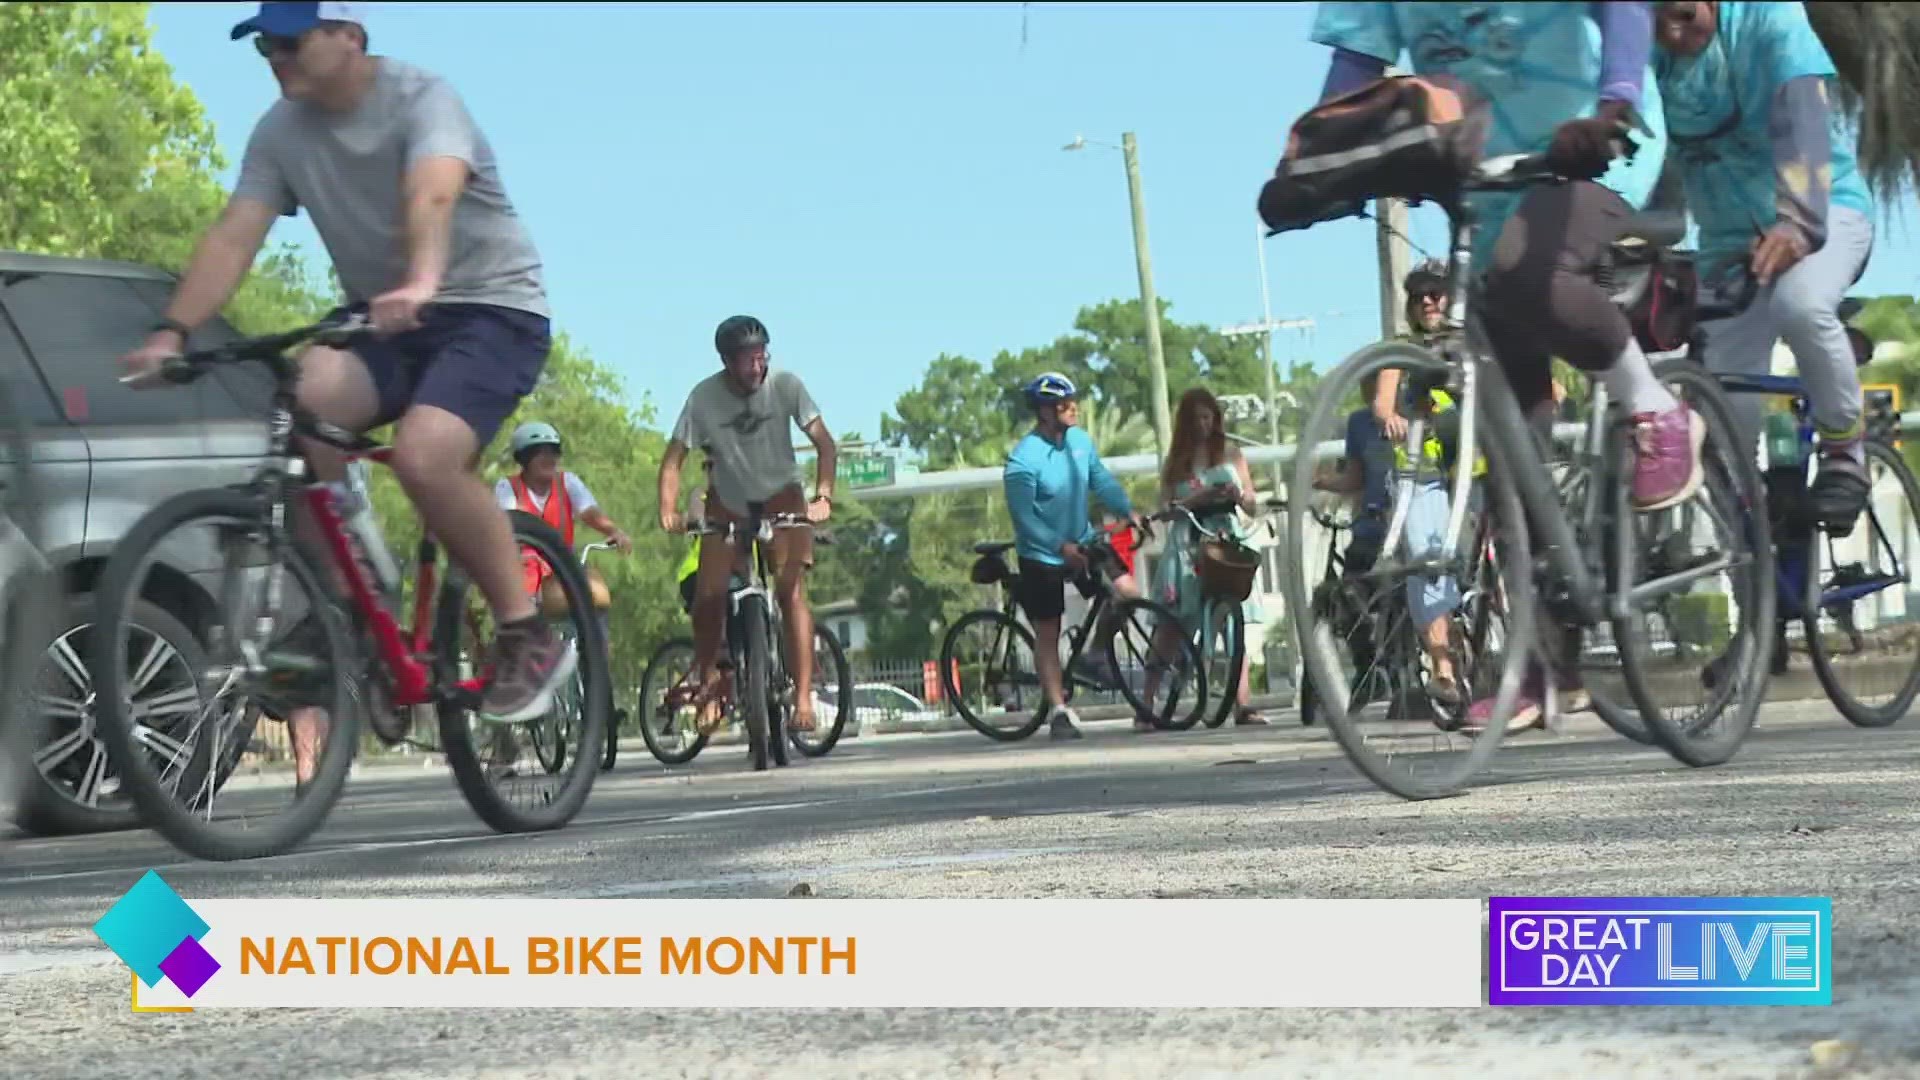 Walk Bike Tampa and Pedal Power Promoters team up to celebrate National Bike Month in Tampa.